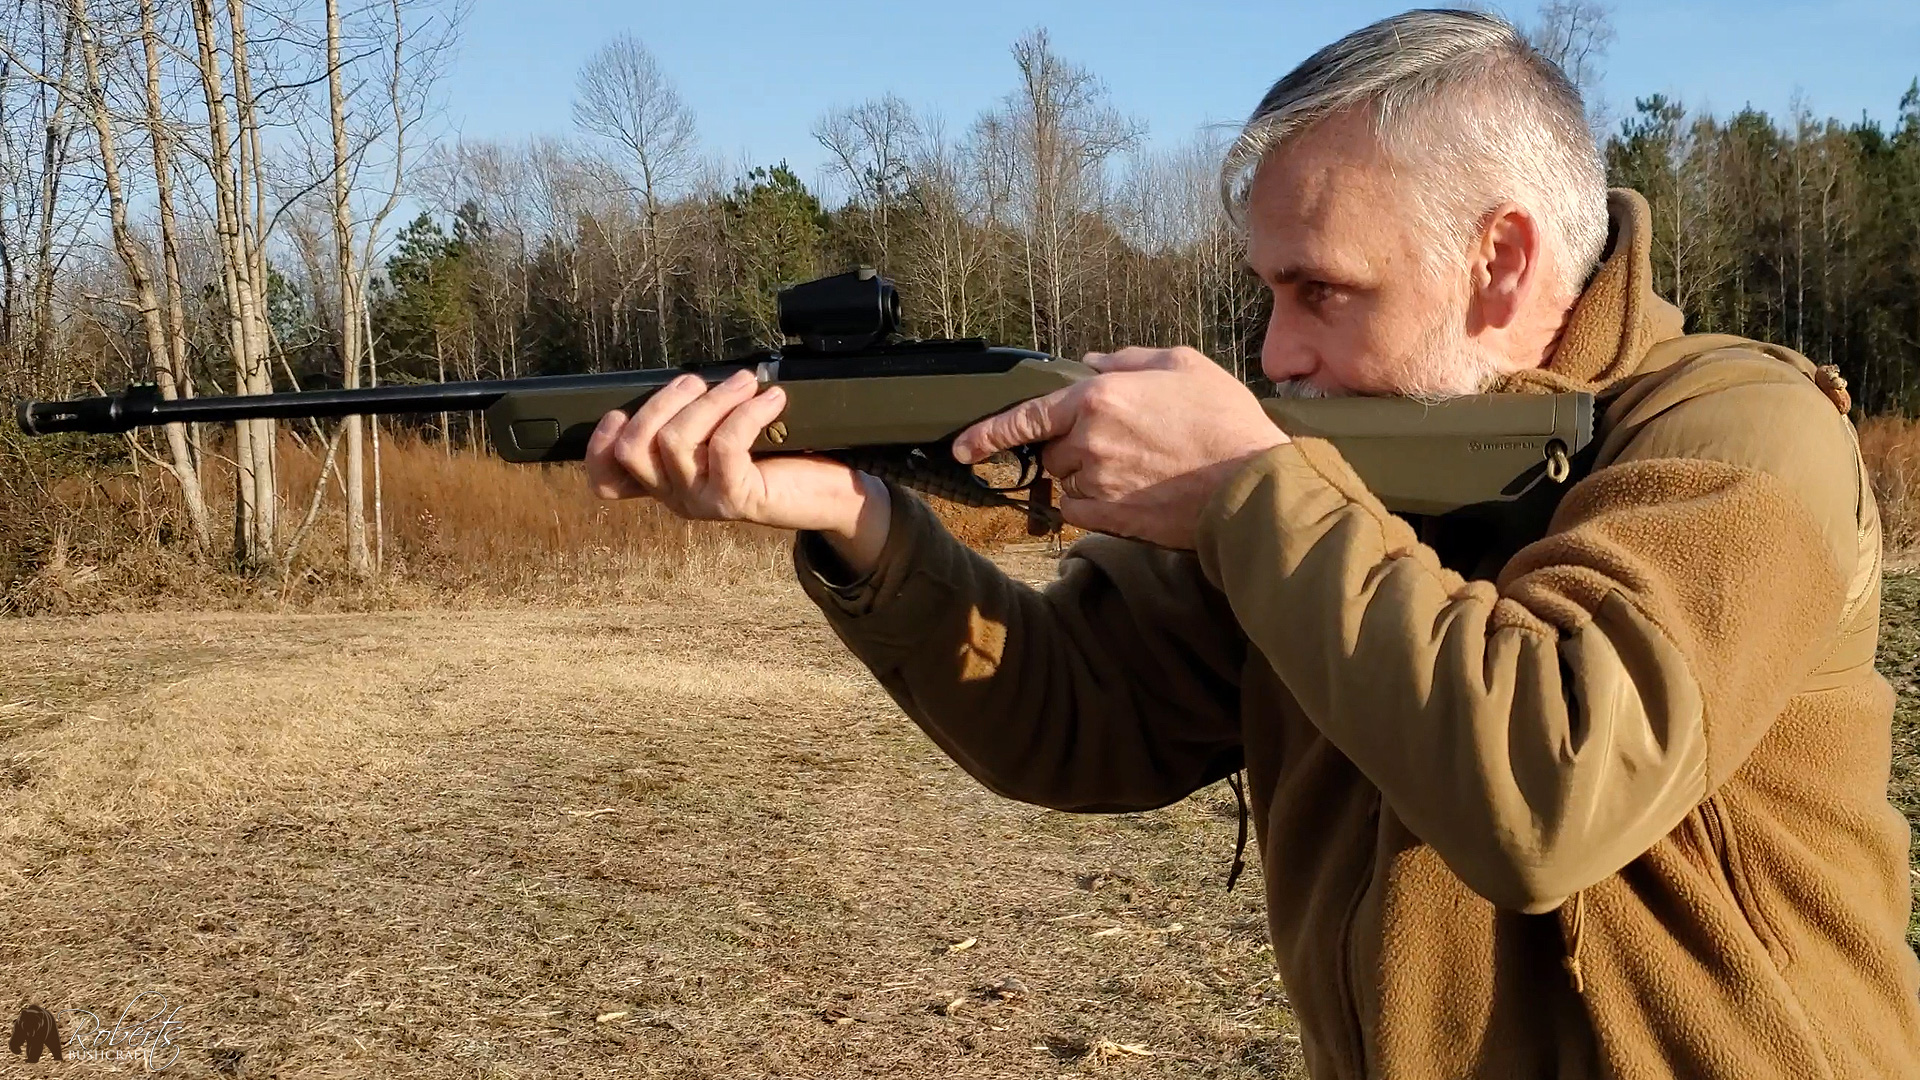 Taking aim with a Ruger 10/22 takedown rifle